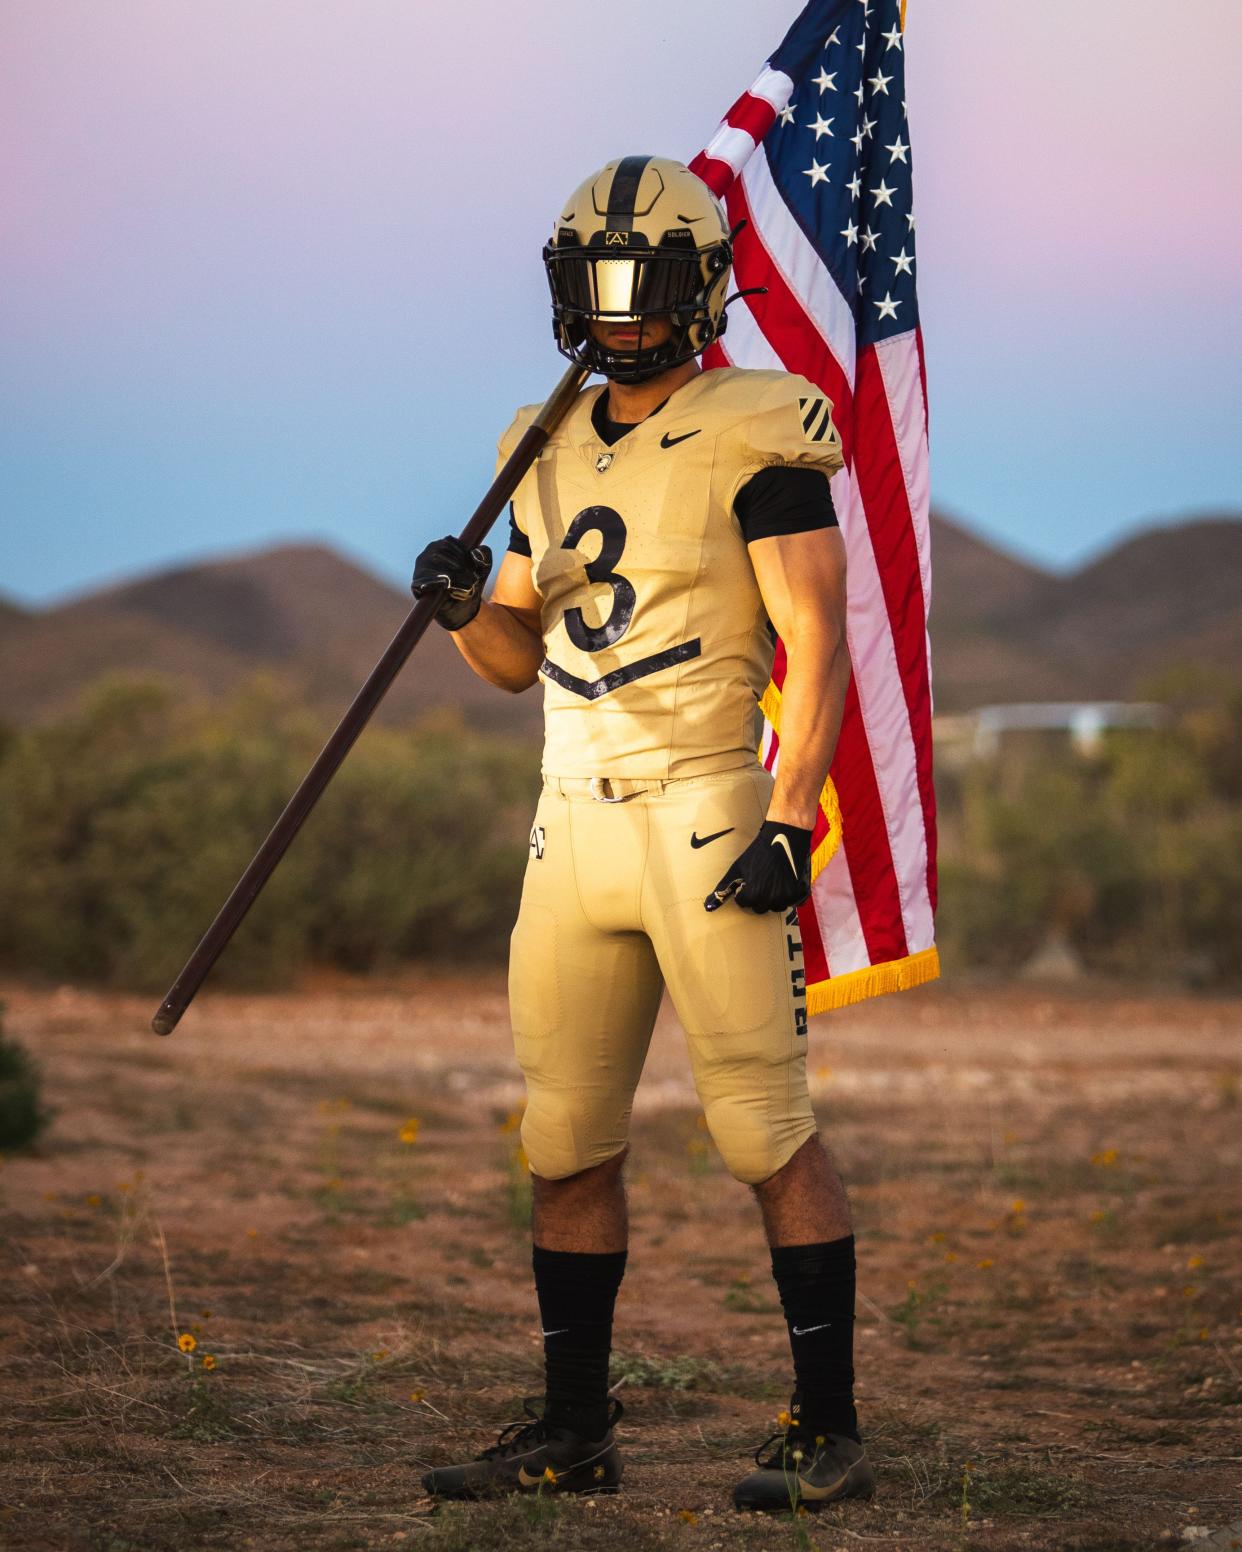 The Army football uniform to be used in the Navy game is a new NIKE design. It is tan in color.